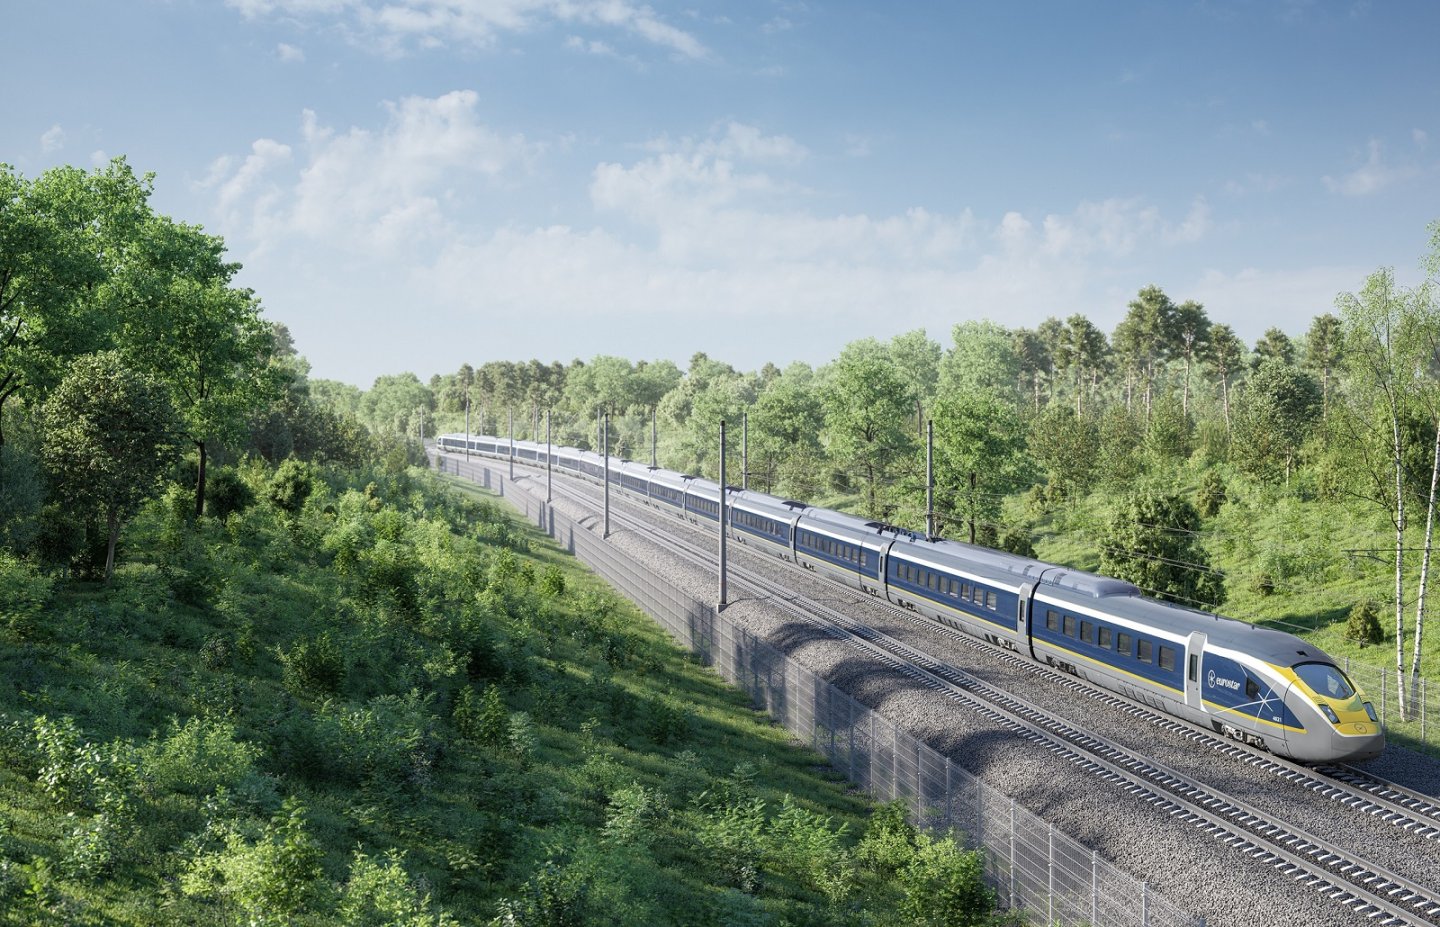 Eurostar services will not run between the Netherlands and the UK from June 2024 to January 2025